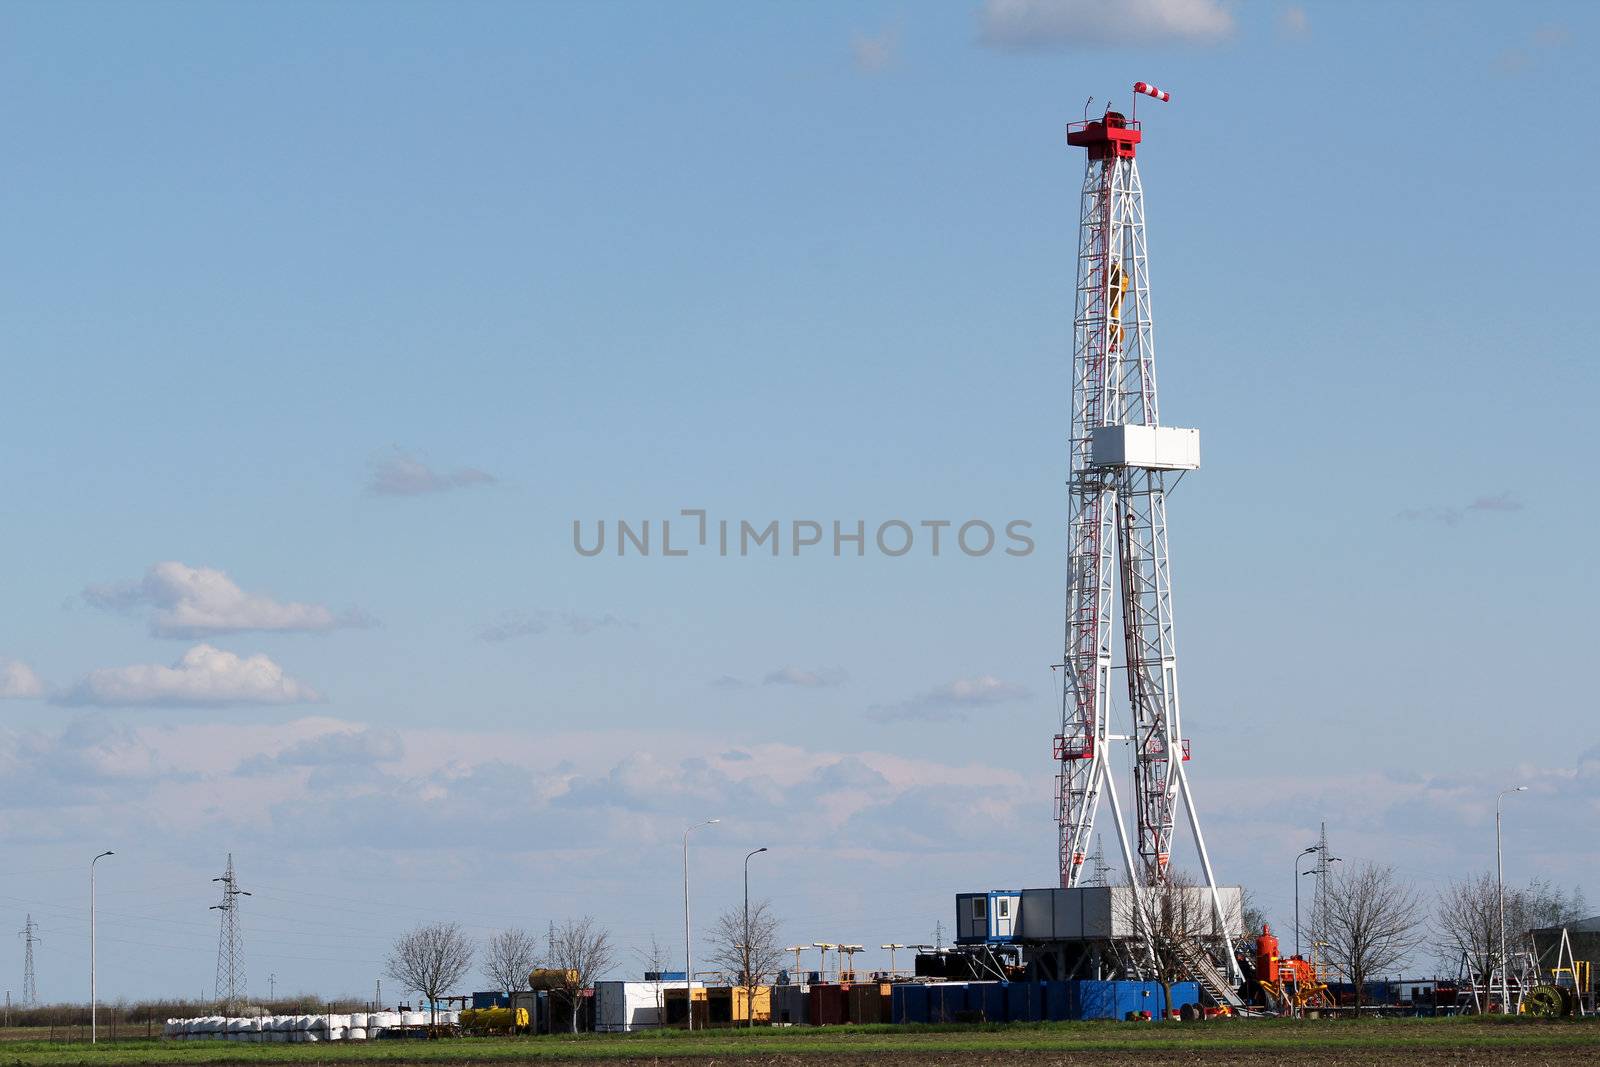 oil drilling rig on field by goce